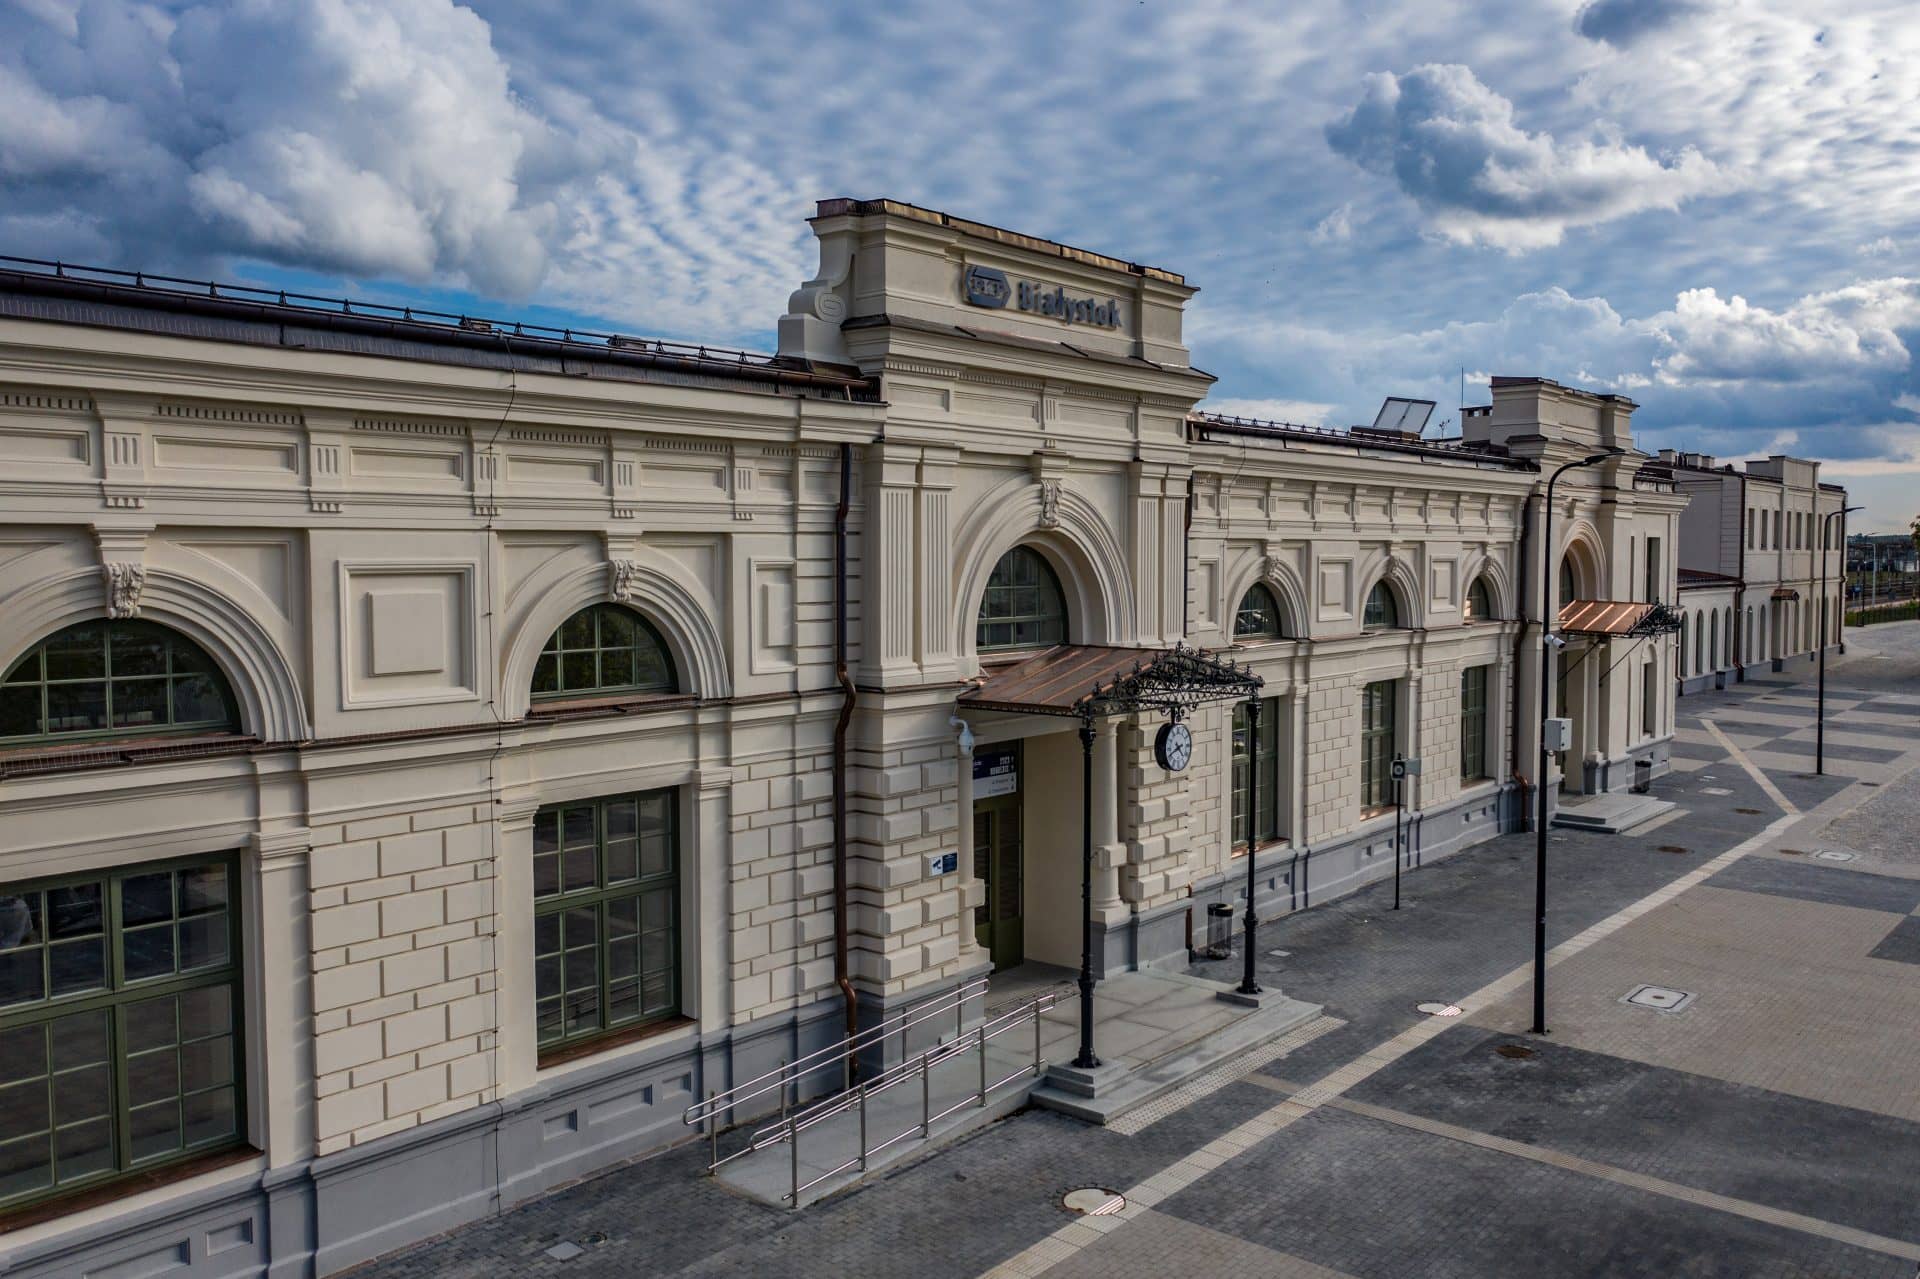 Budimex completed renovation and upgrade project of PKP S.A. railway station in Białystok.